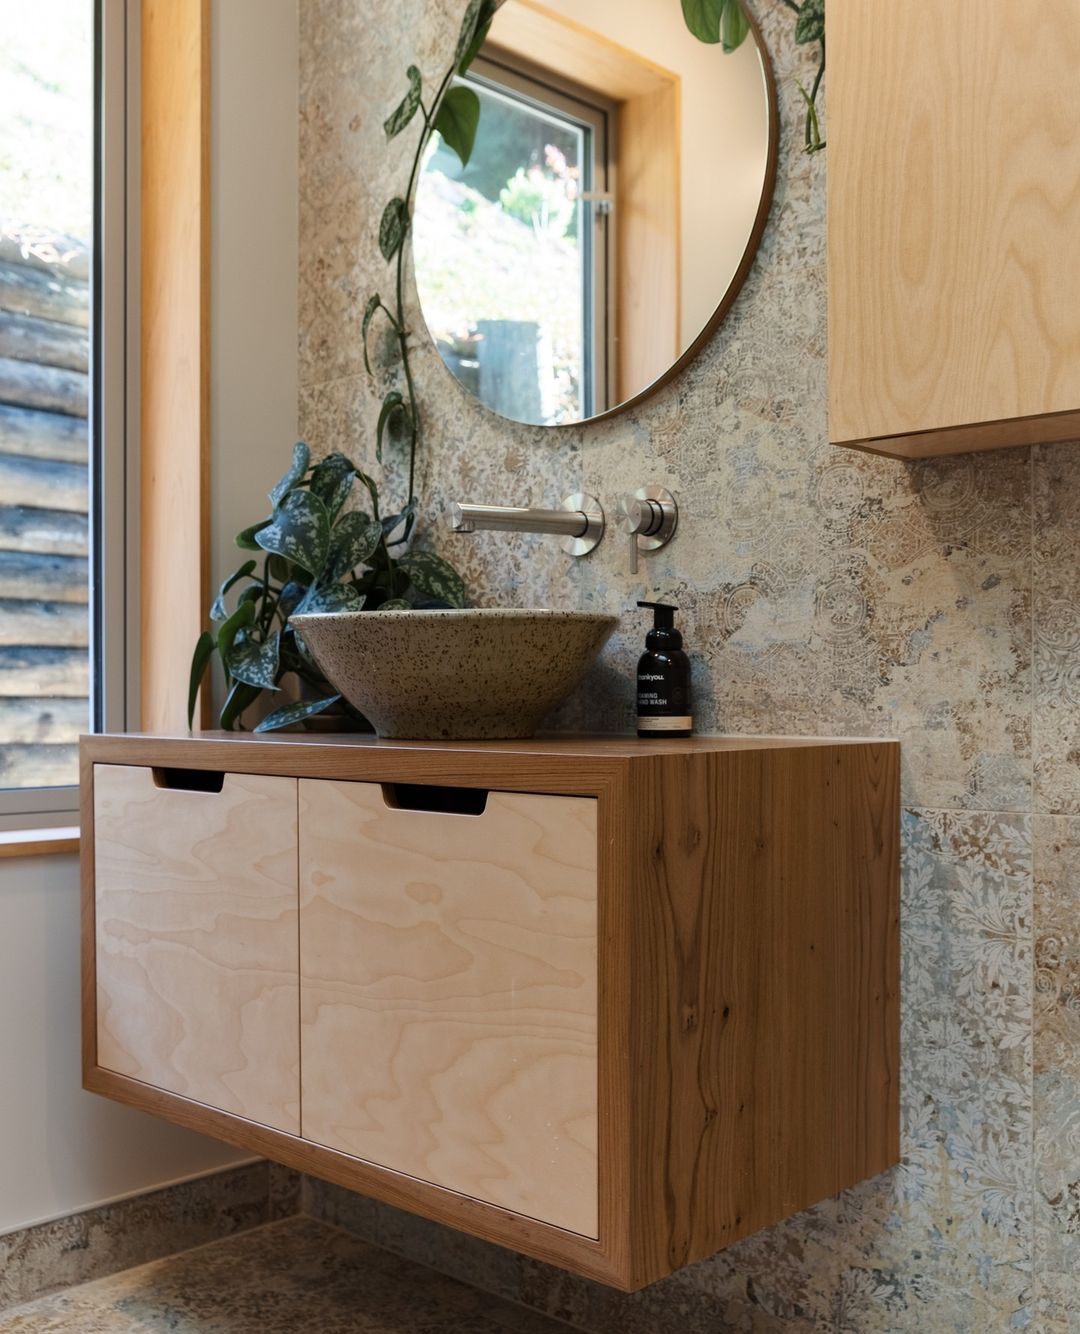 plywood cabinet in a bathroom